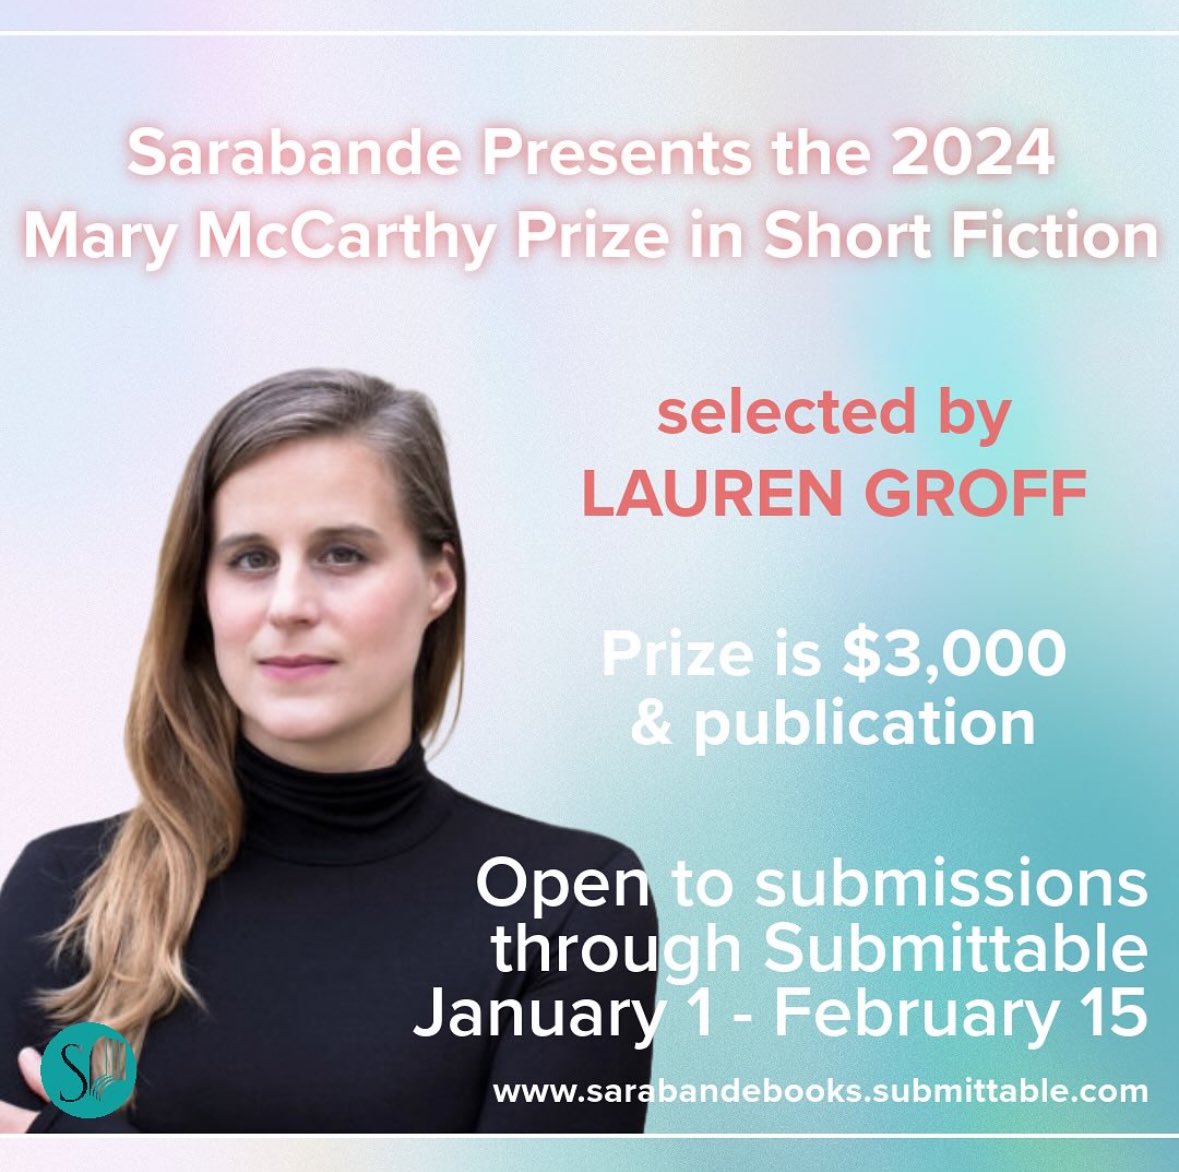 ✨ATTENTION FICTION WRITERS!✨ The Mary McCarthy Prize in Short Fiction is accepting manuscript submissions through February 15! @legroff will select one winning manuscript for publication by Sarabande Books. Learn more and submit at the link in our bio!